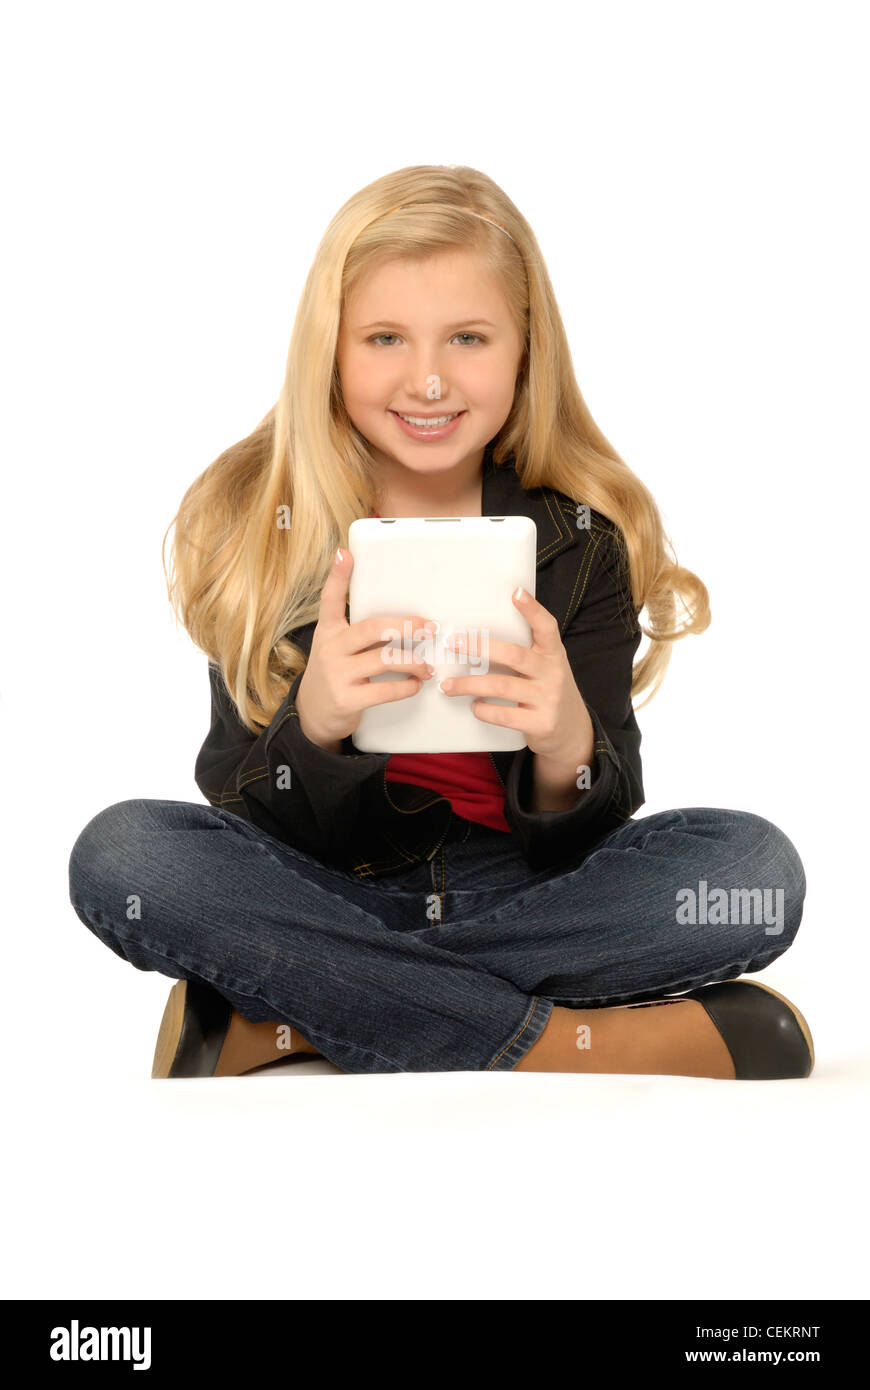 Ten year old girl sitting and using a tablet computer. She is smiling and looking at the viewer. Stock Photo